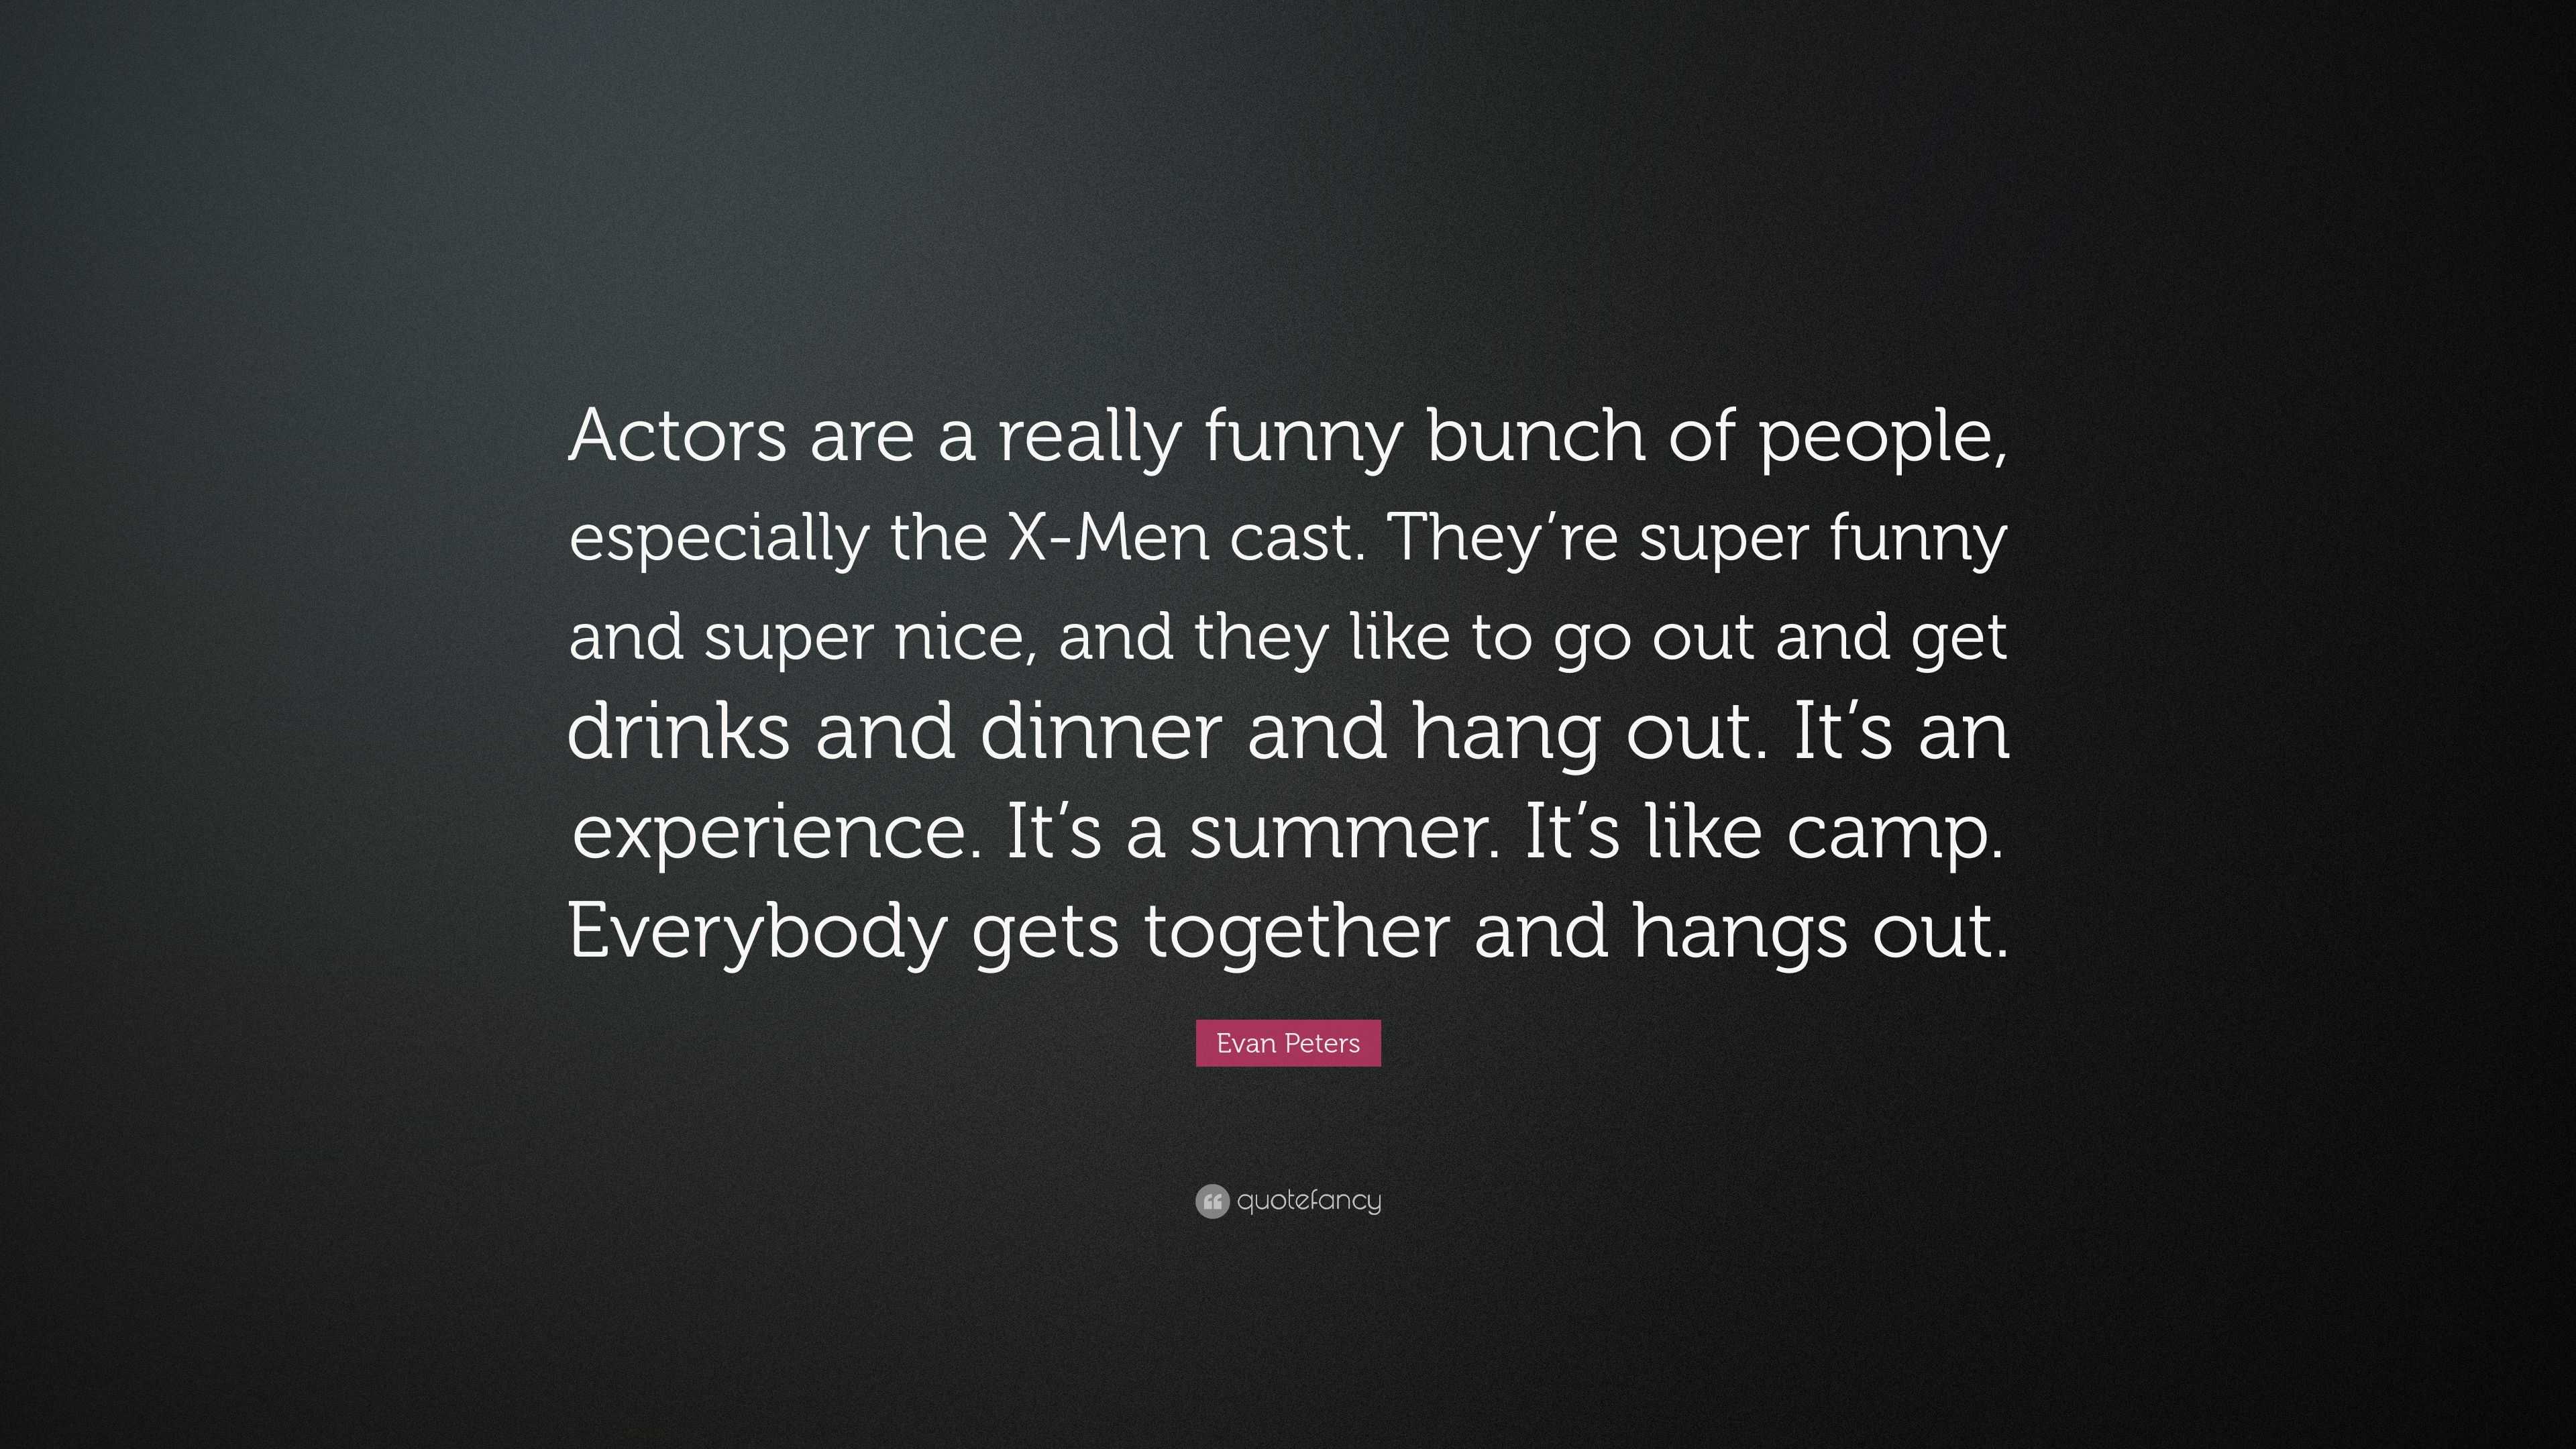 5403192 Evan Peters Quote Actors Are A Really Funny Bunch Of People 